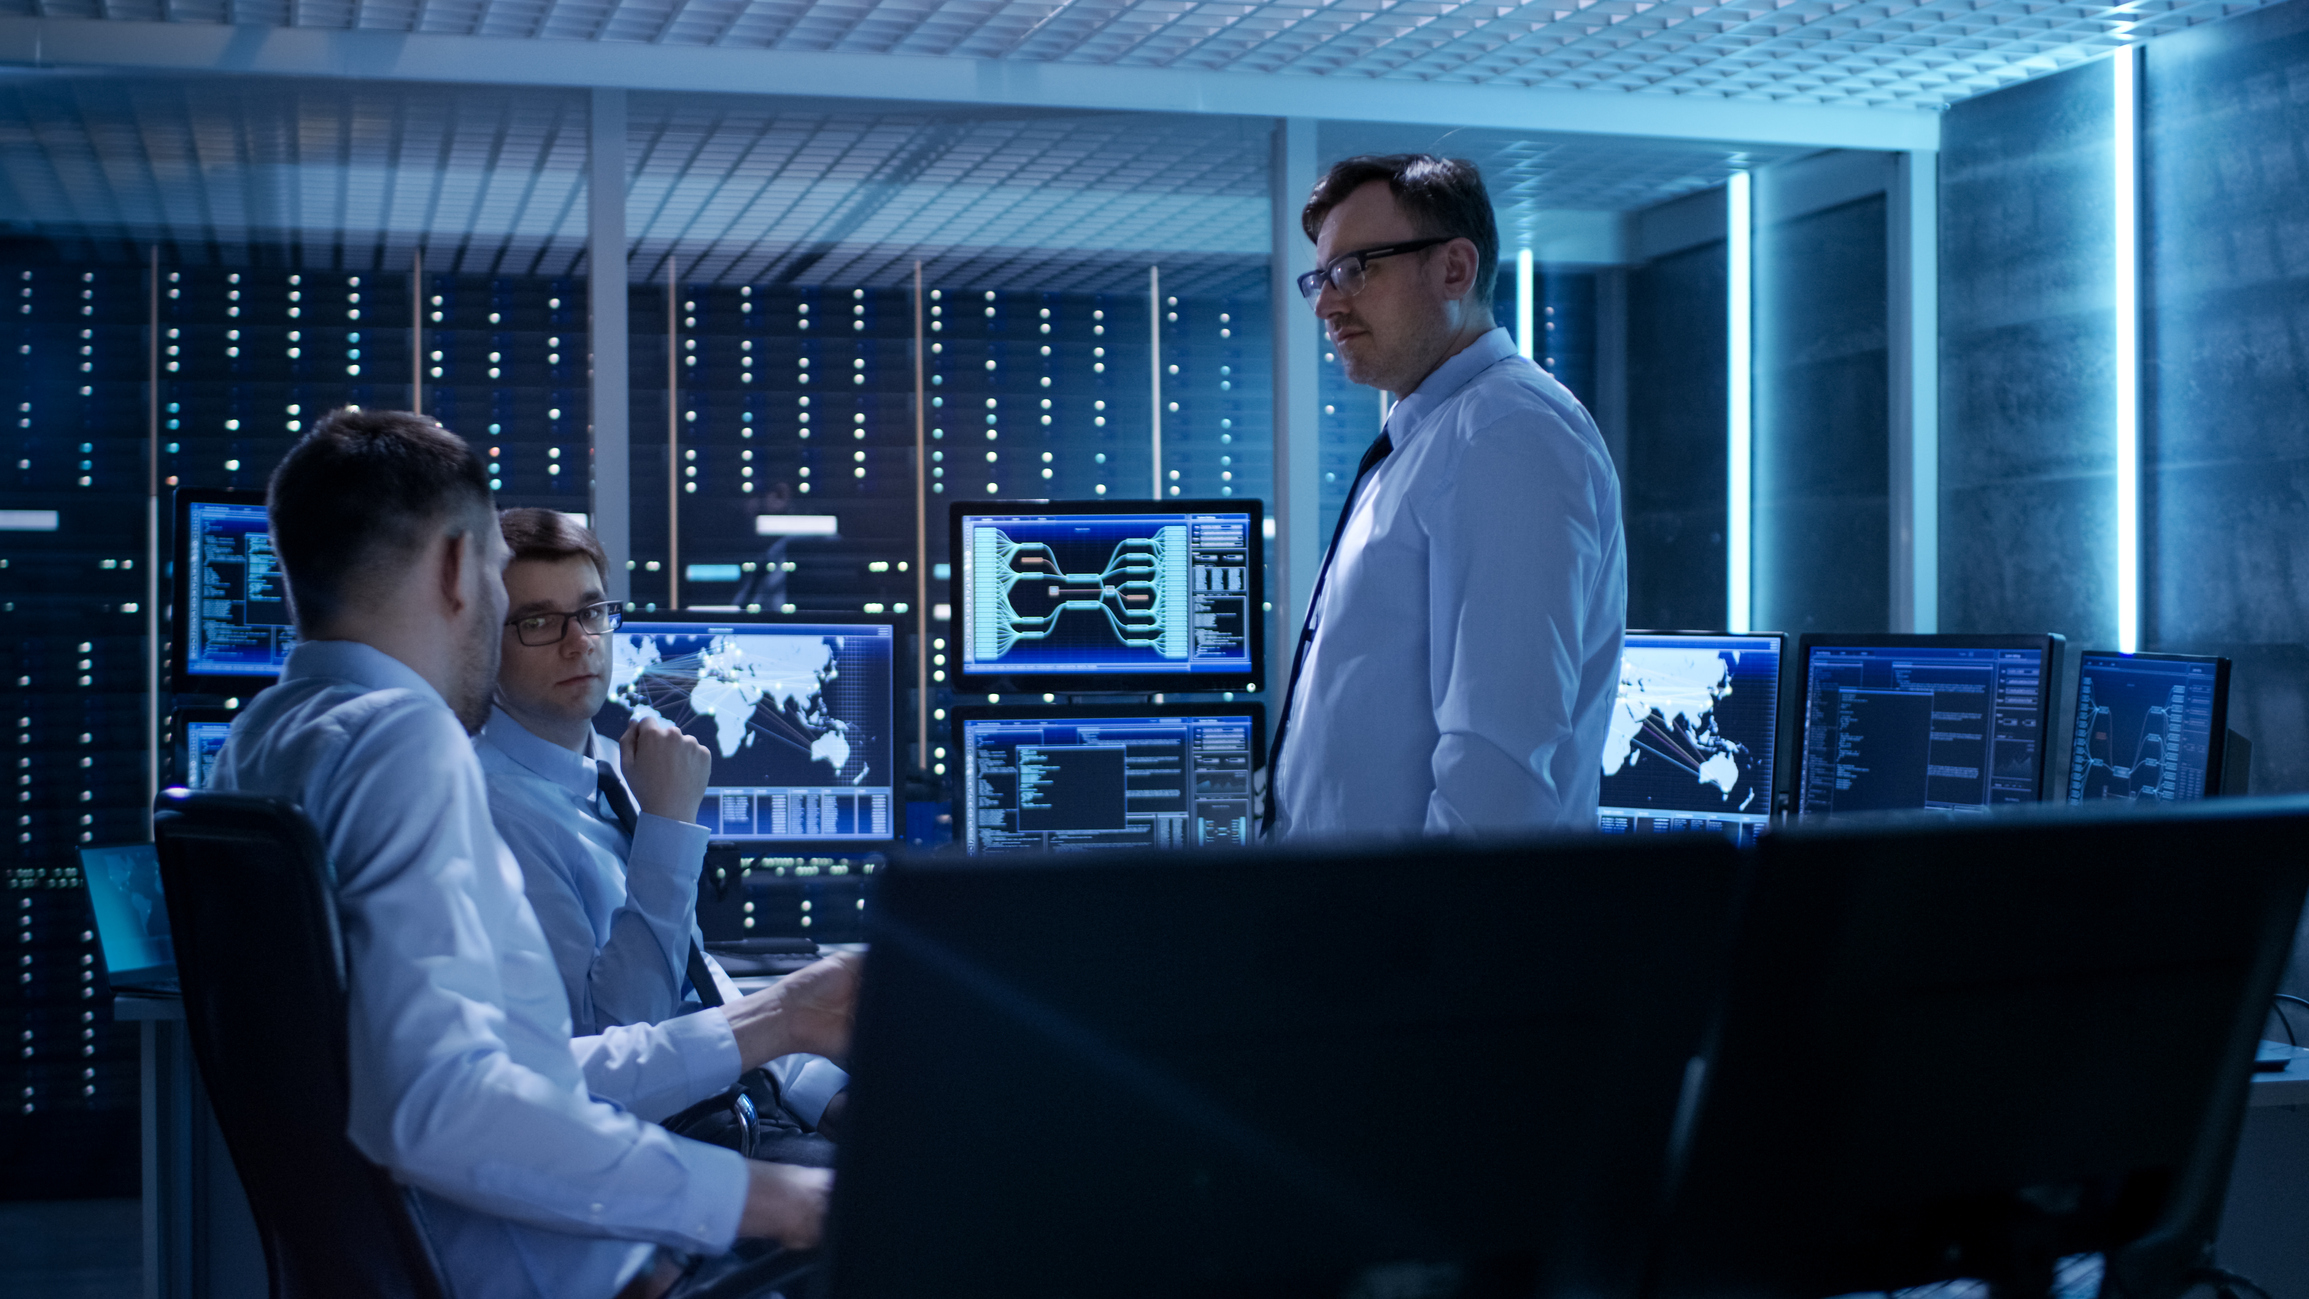  Cybersecurity Jobs are on the rise. Get Cybersecurity Certified with Alpine Security 